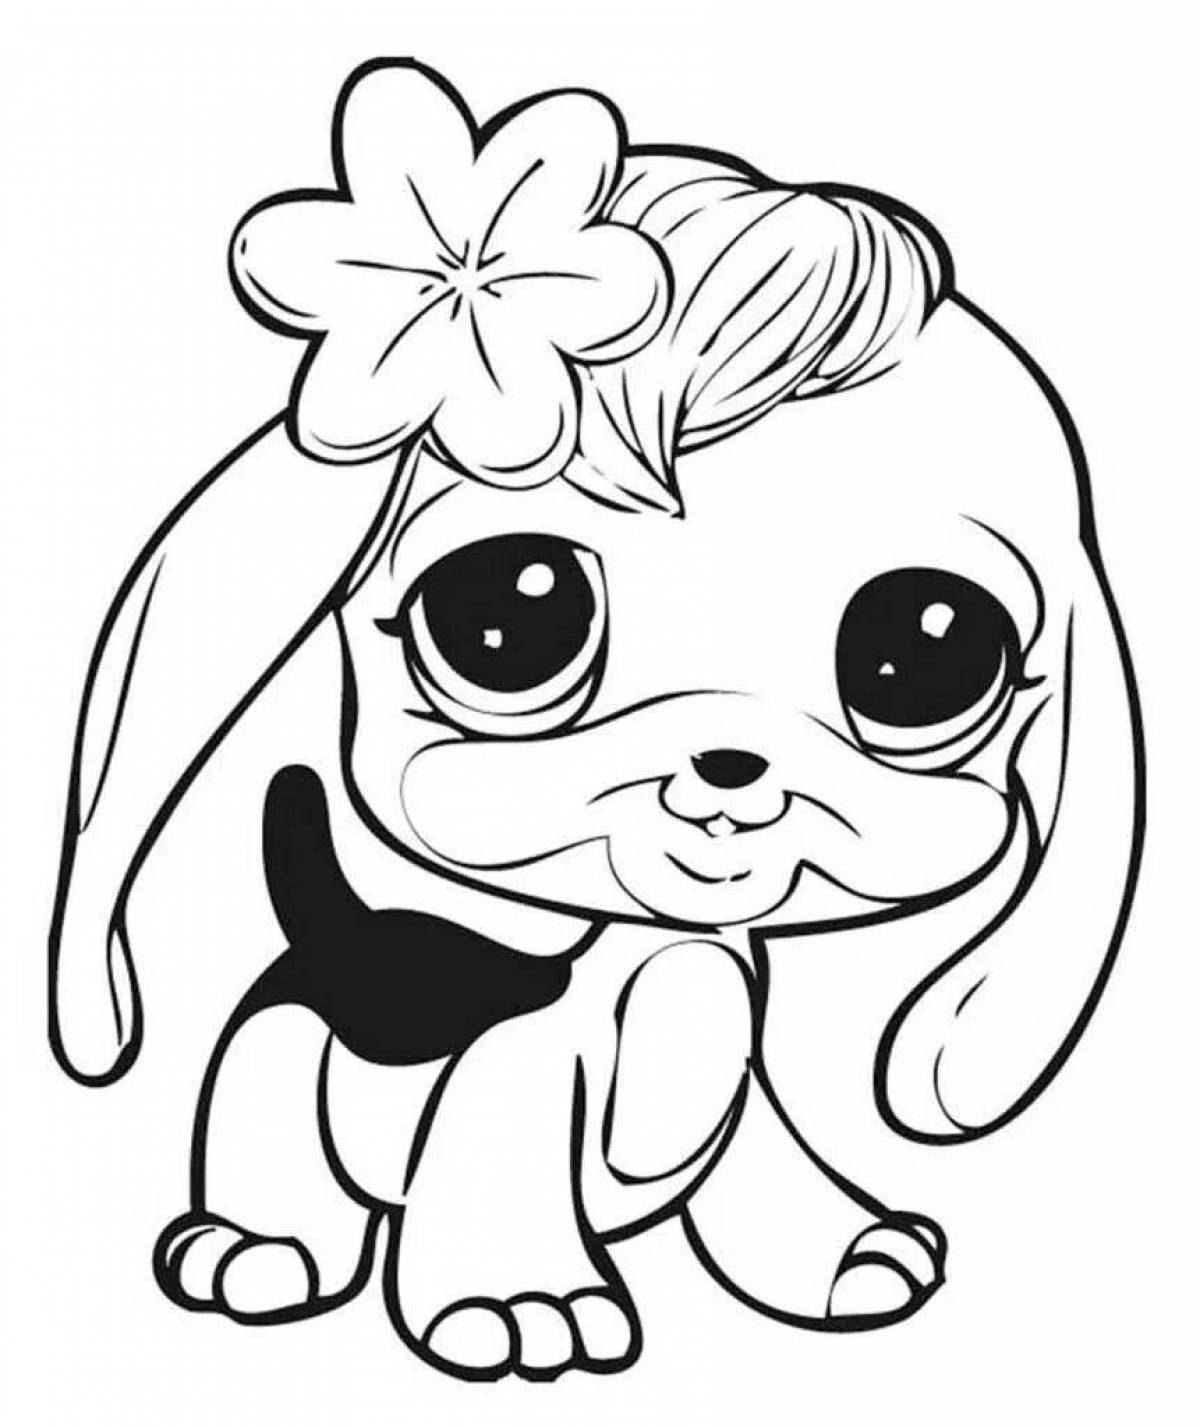 Curious coloring pages puppies for girls